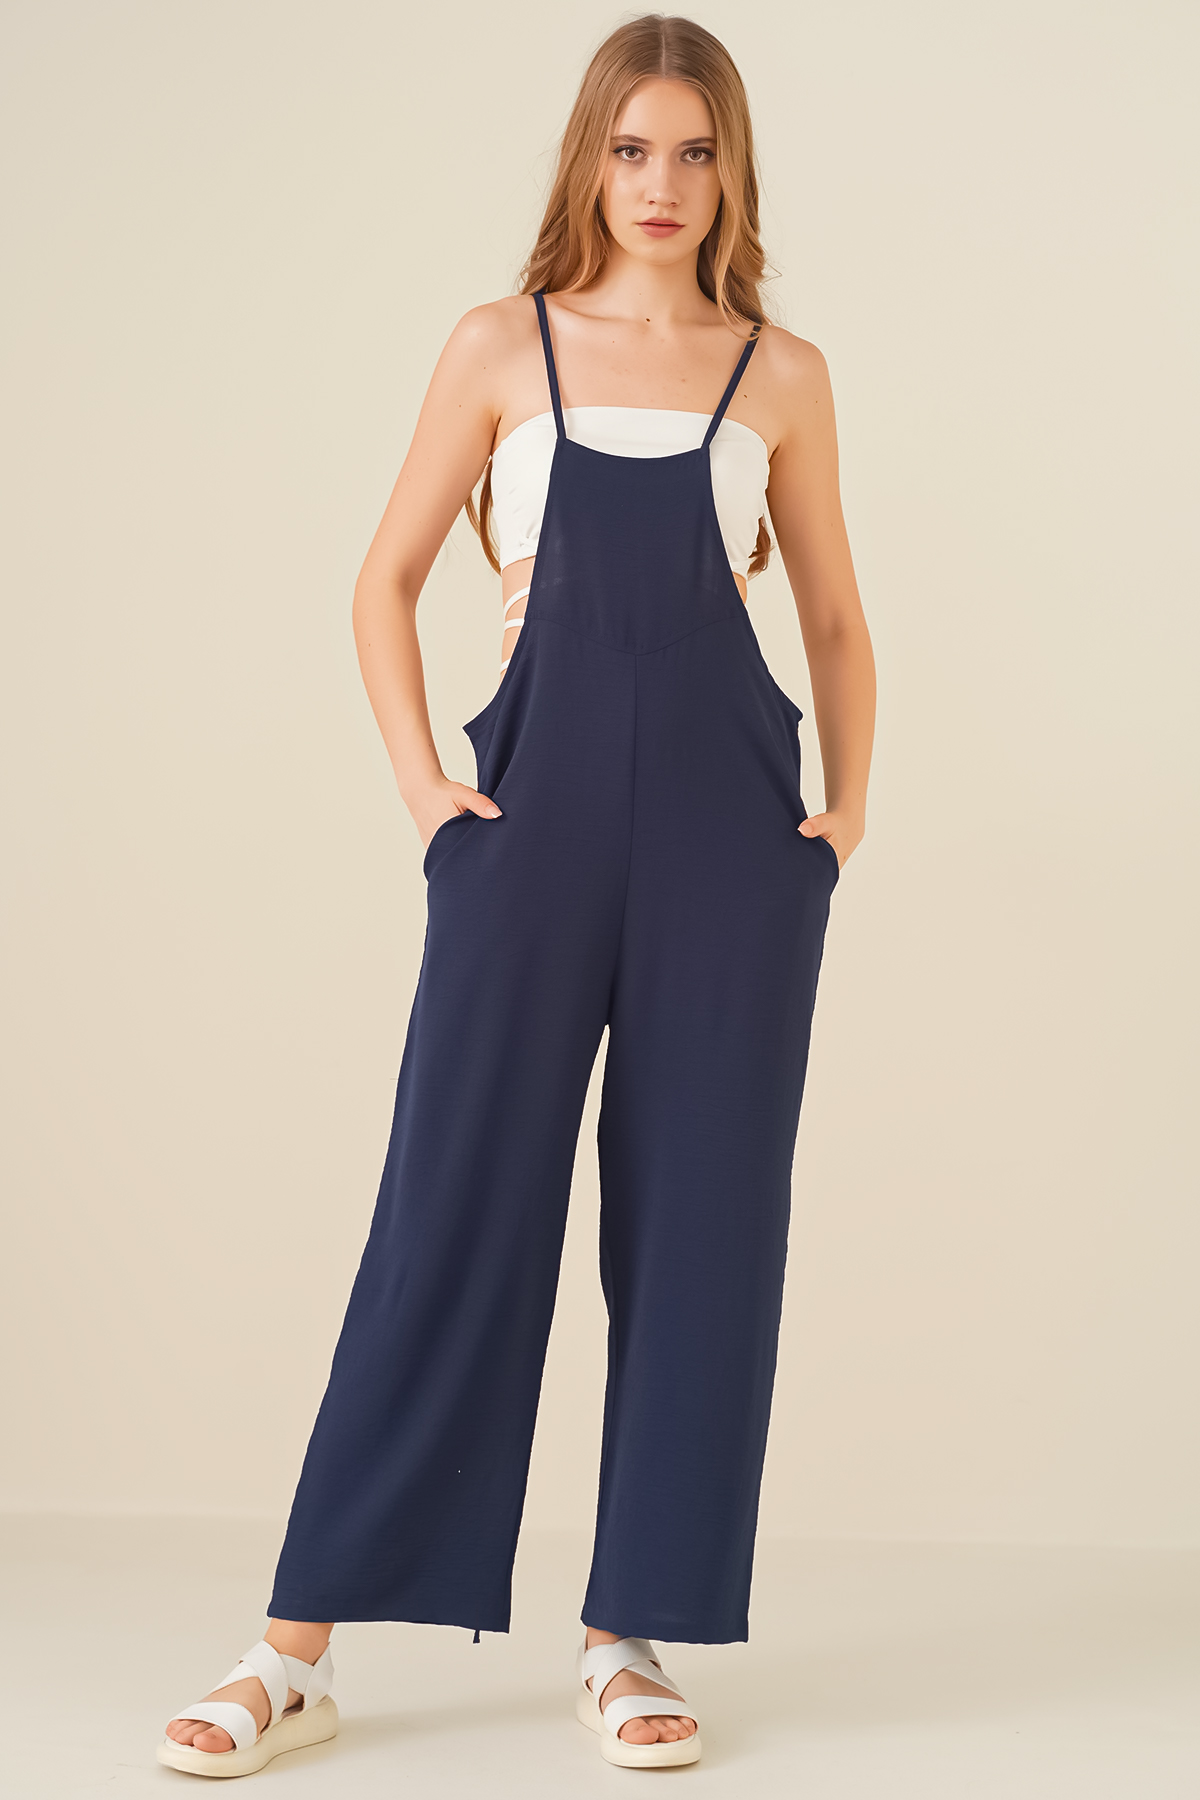 A model wears 43803 - Overalls - Navy Blue, wholesale Jumpsuit of Bigdart to display at Lonca